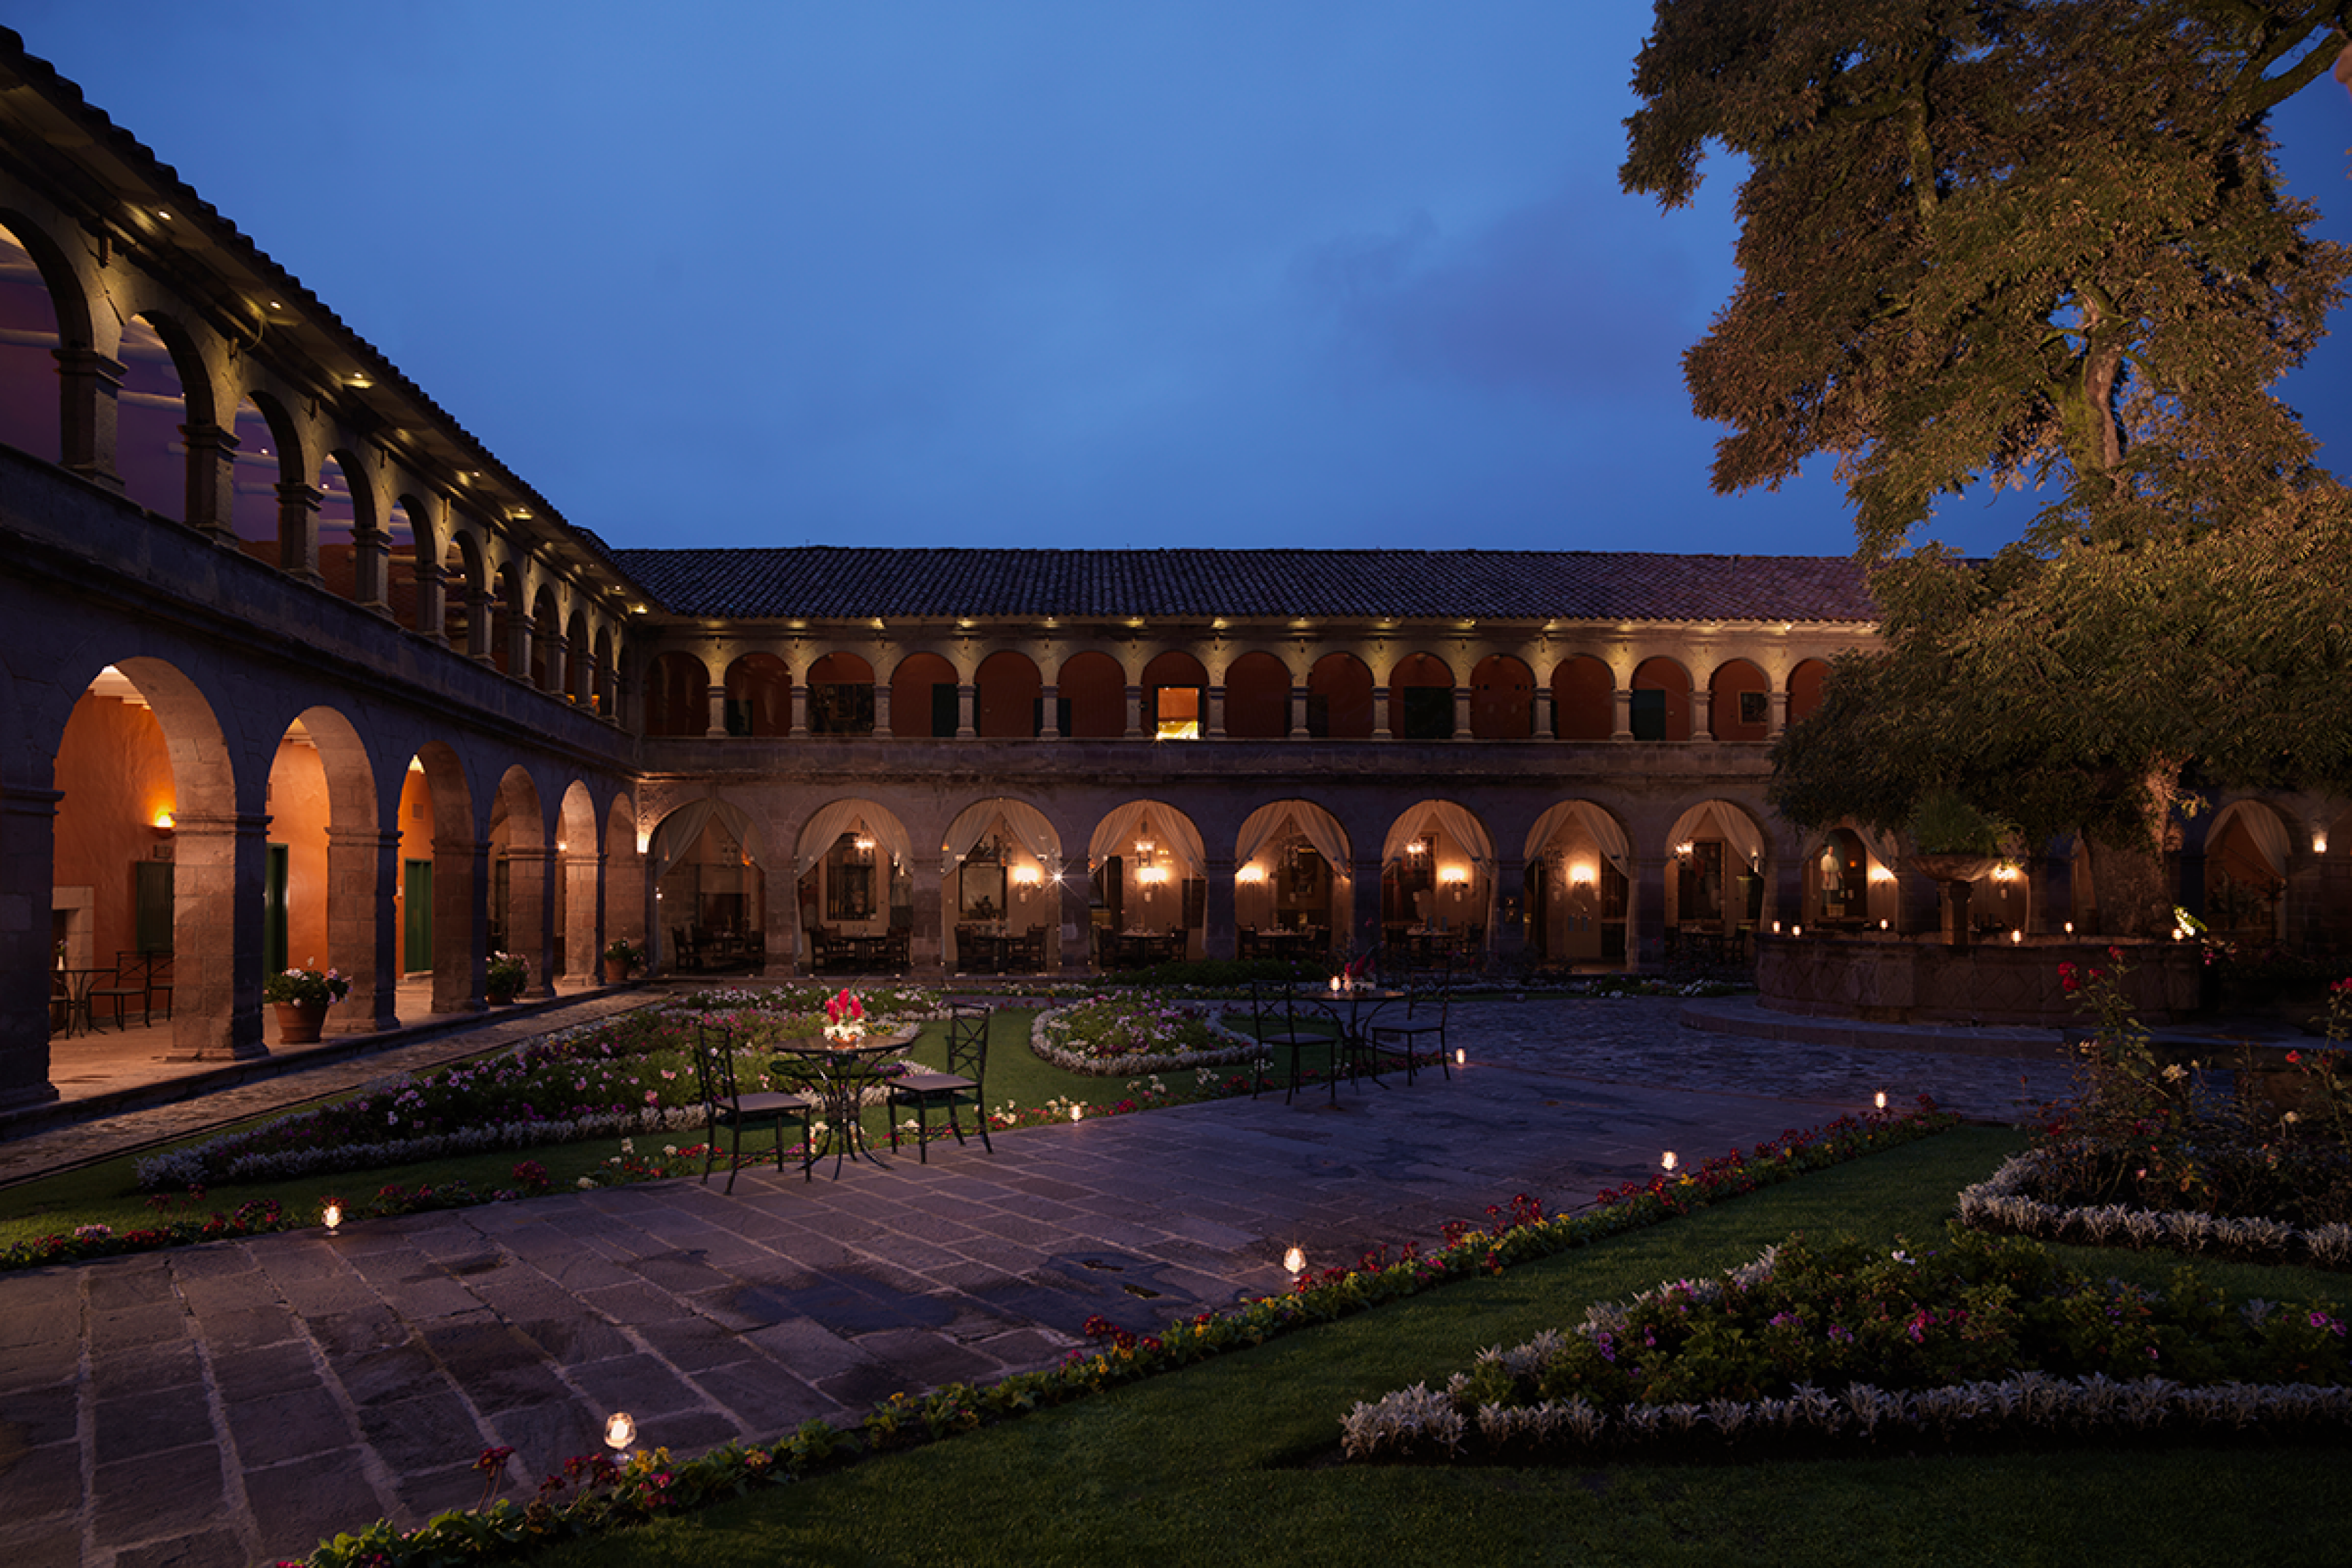 Courtyard lit up at night with candles